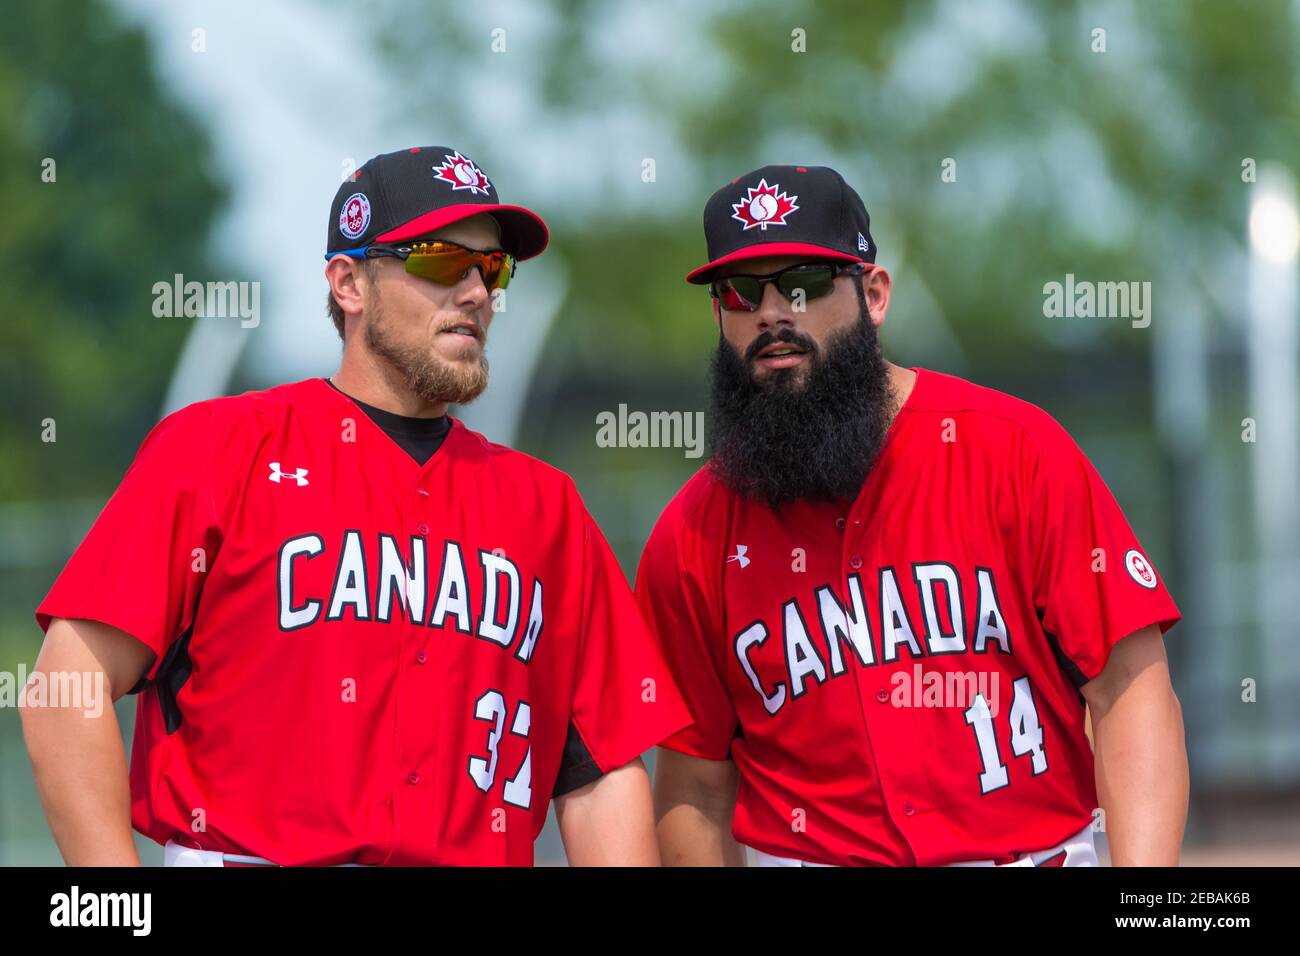 Toronto Pan American Games 2015, Baseball tournament: Jordan Lennerton (left) and Timothy Smith (right) both from team Canada talk at the beginning of Stock Photo